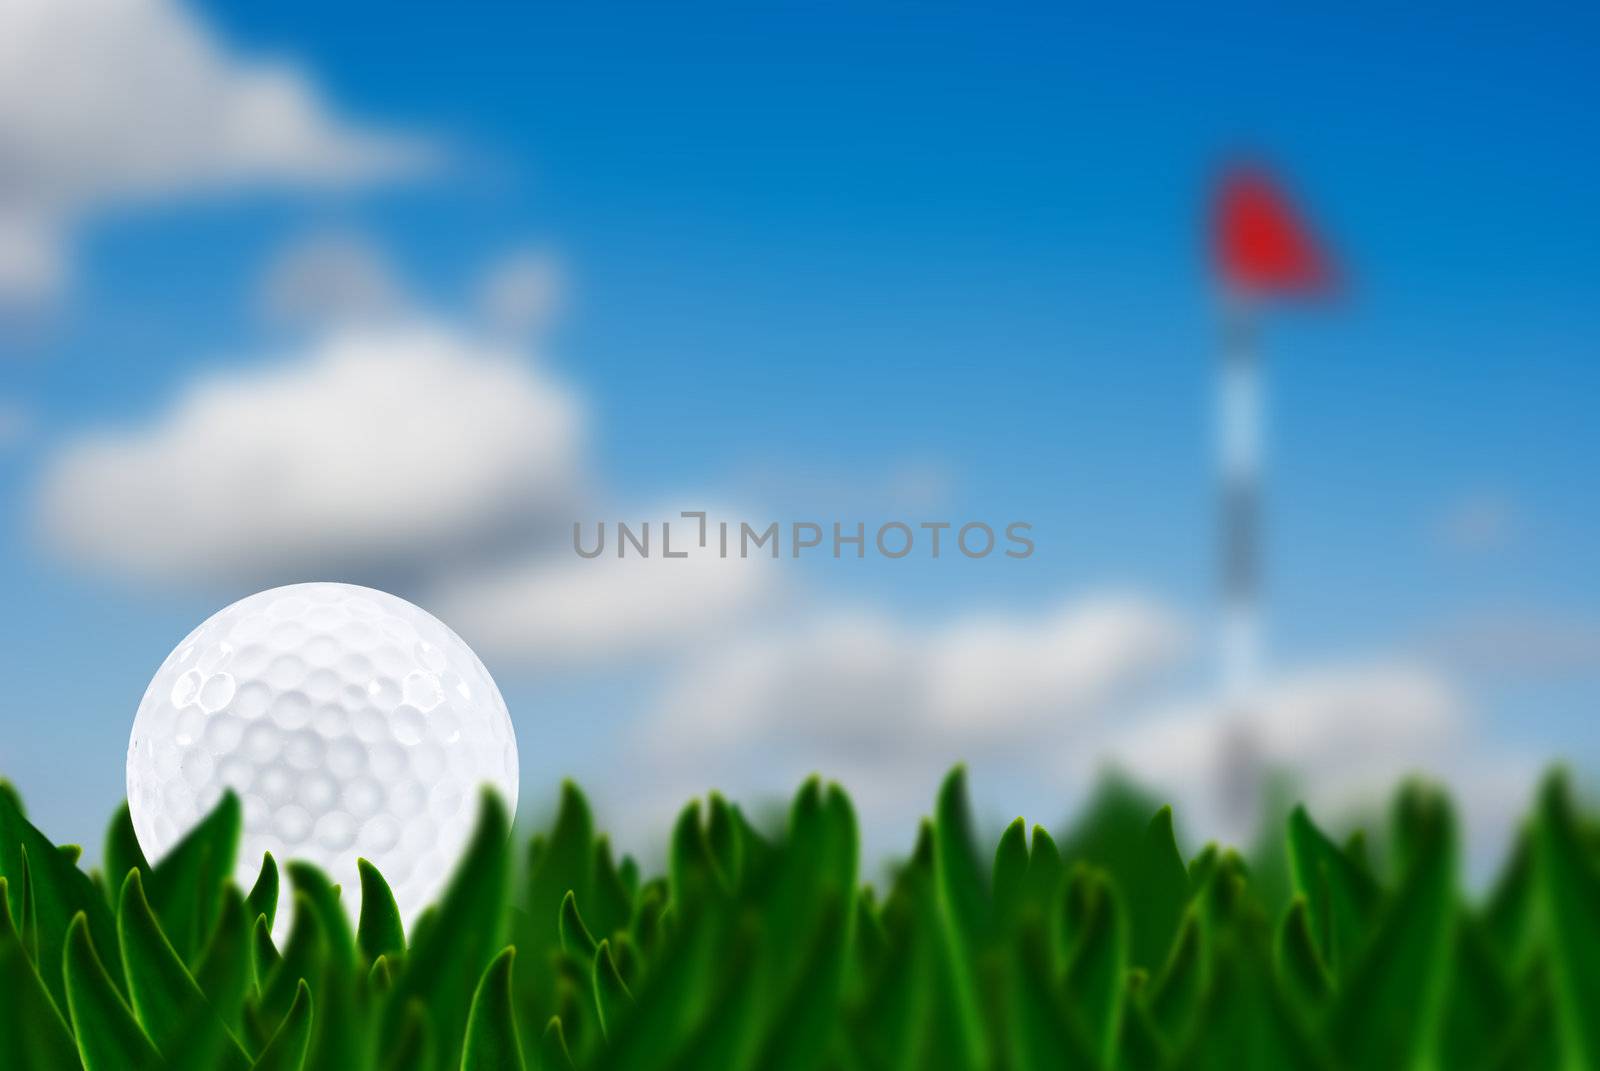 Golf ball on a golf course with the green in the background - very shallow depth of field by tish1